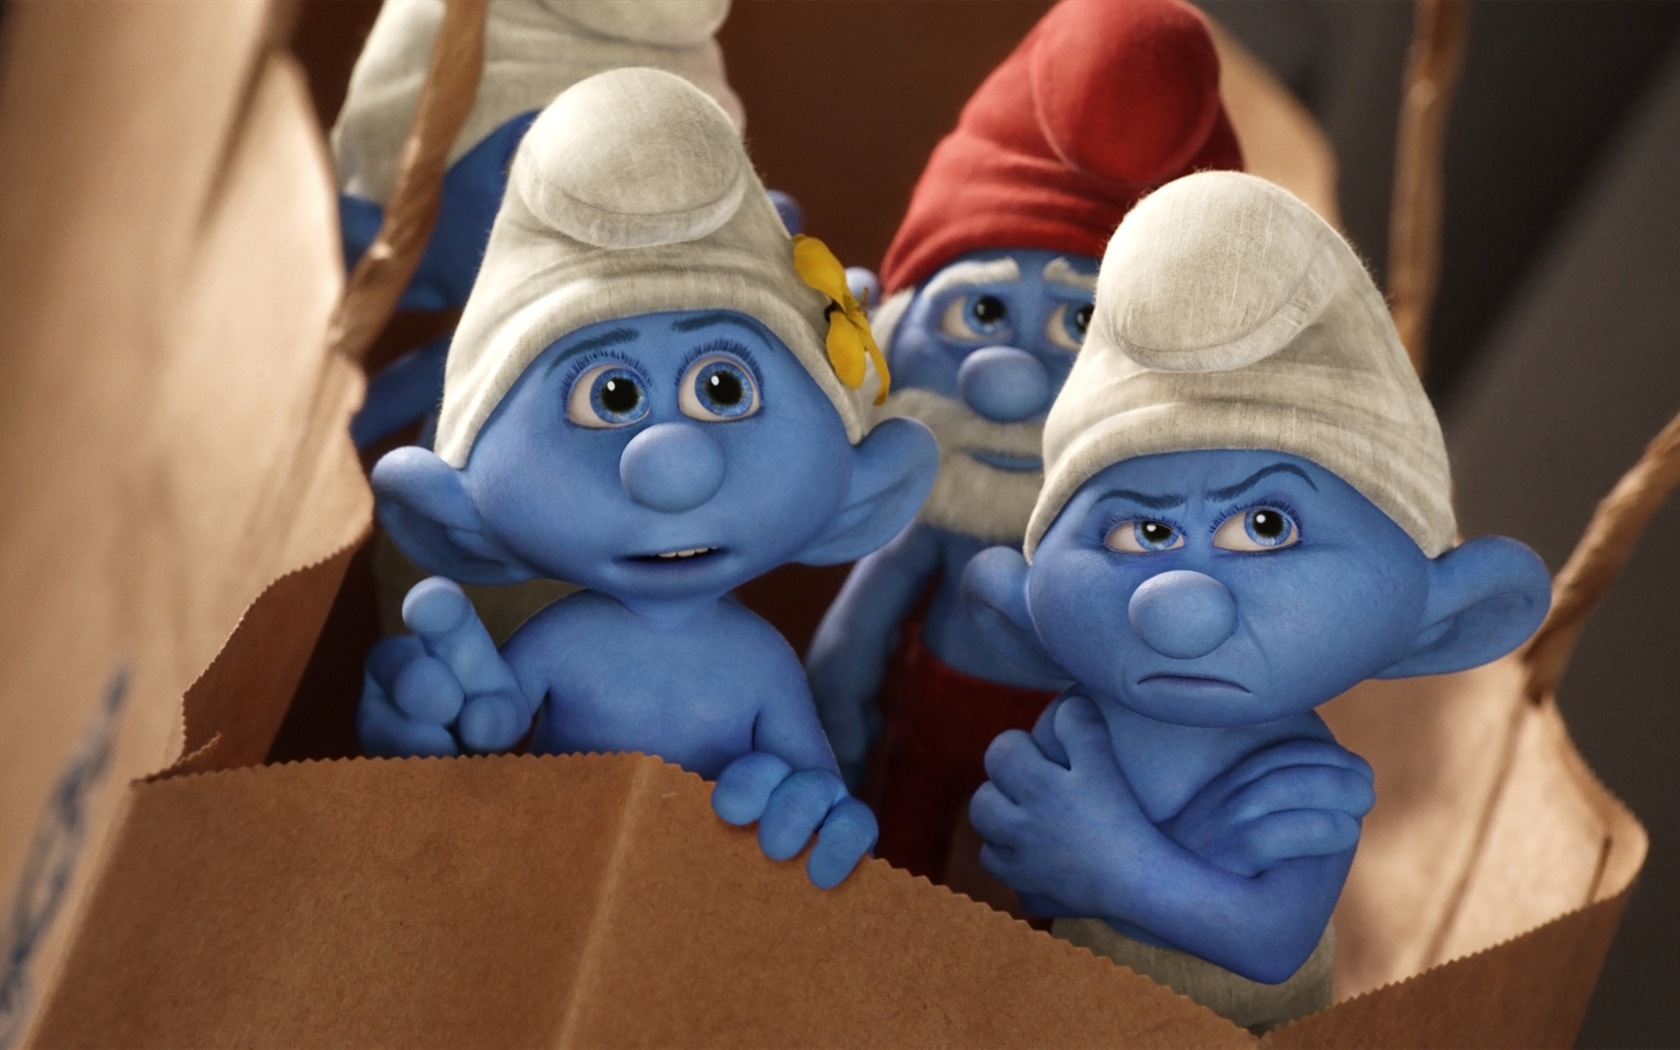 The Smurfs 2 HD movie wallpapers #12 - 1680x1050